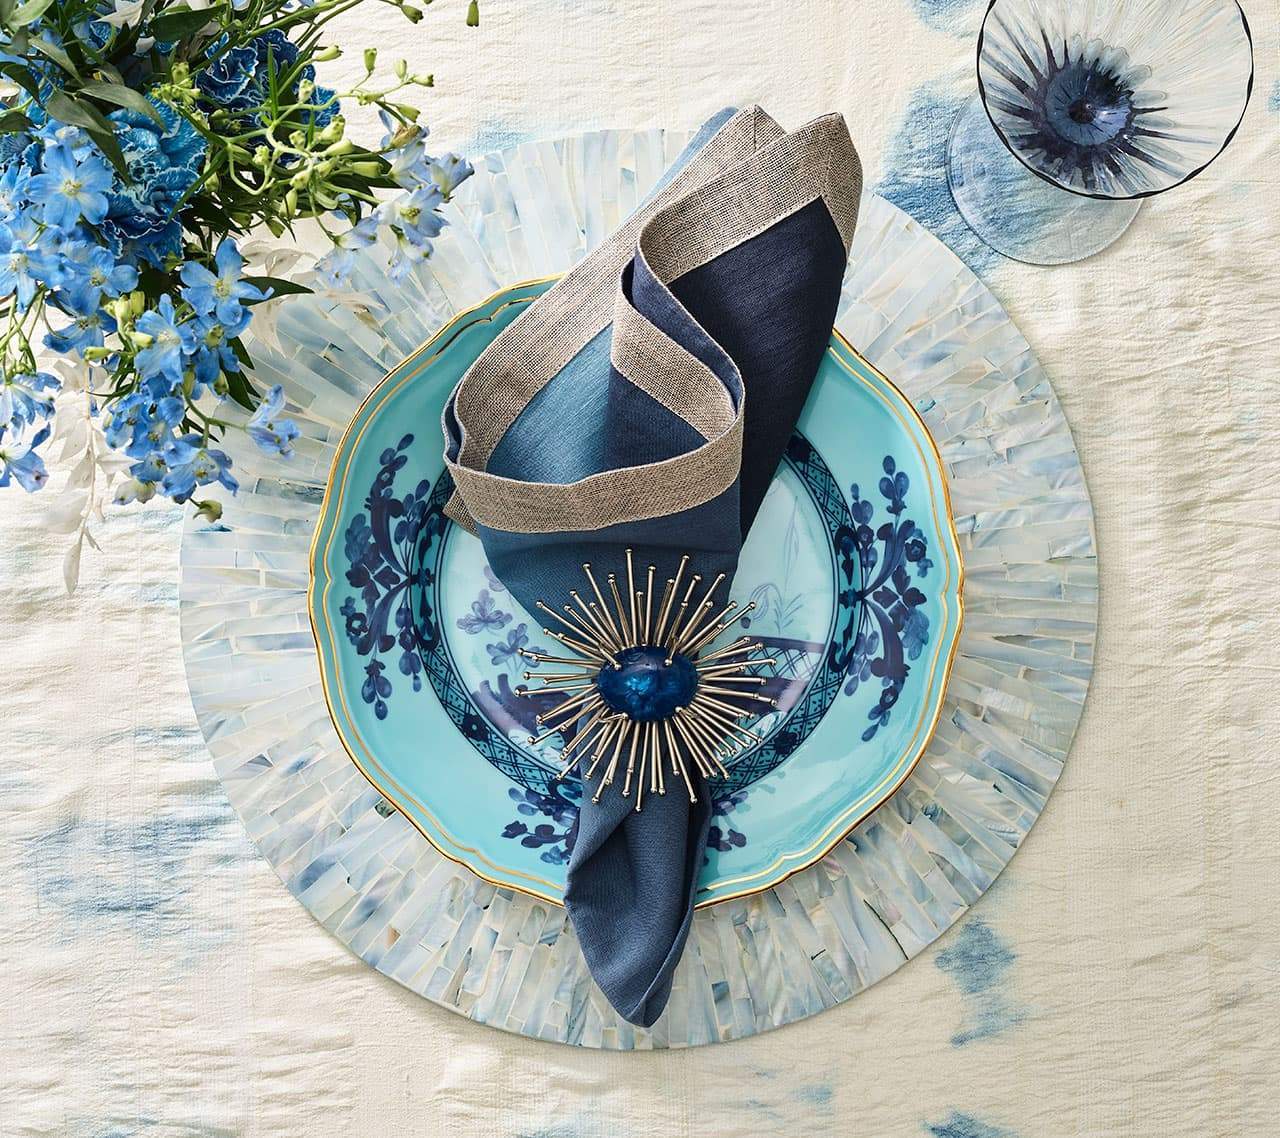 Tahiti Placemat in periwinkle underneath an aqua plate, navy napkin, a blue wine glass